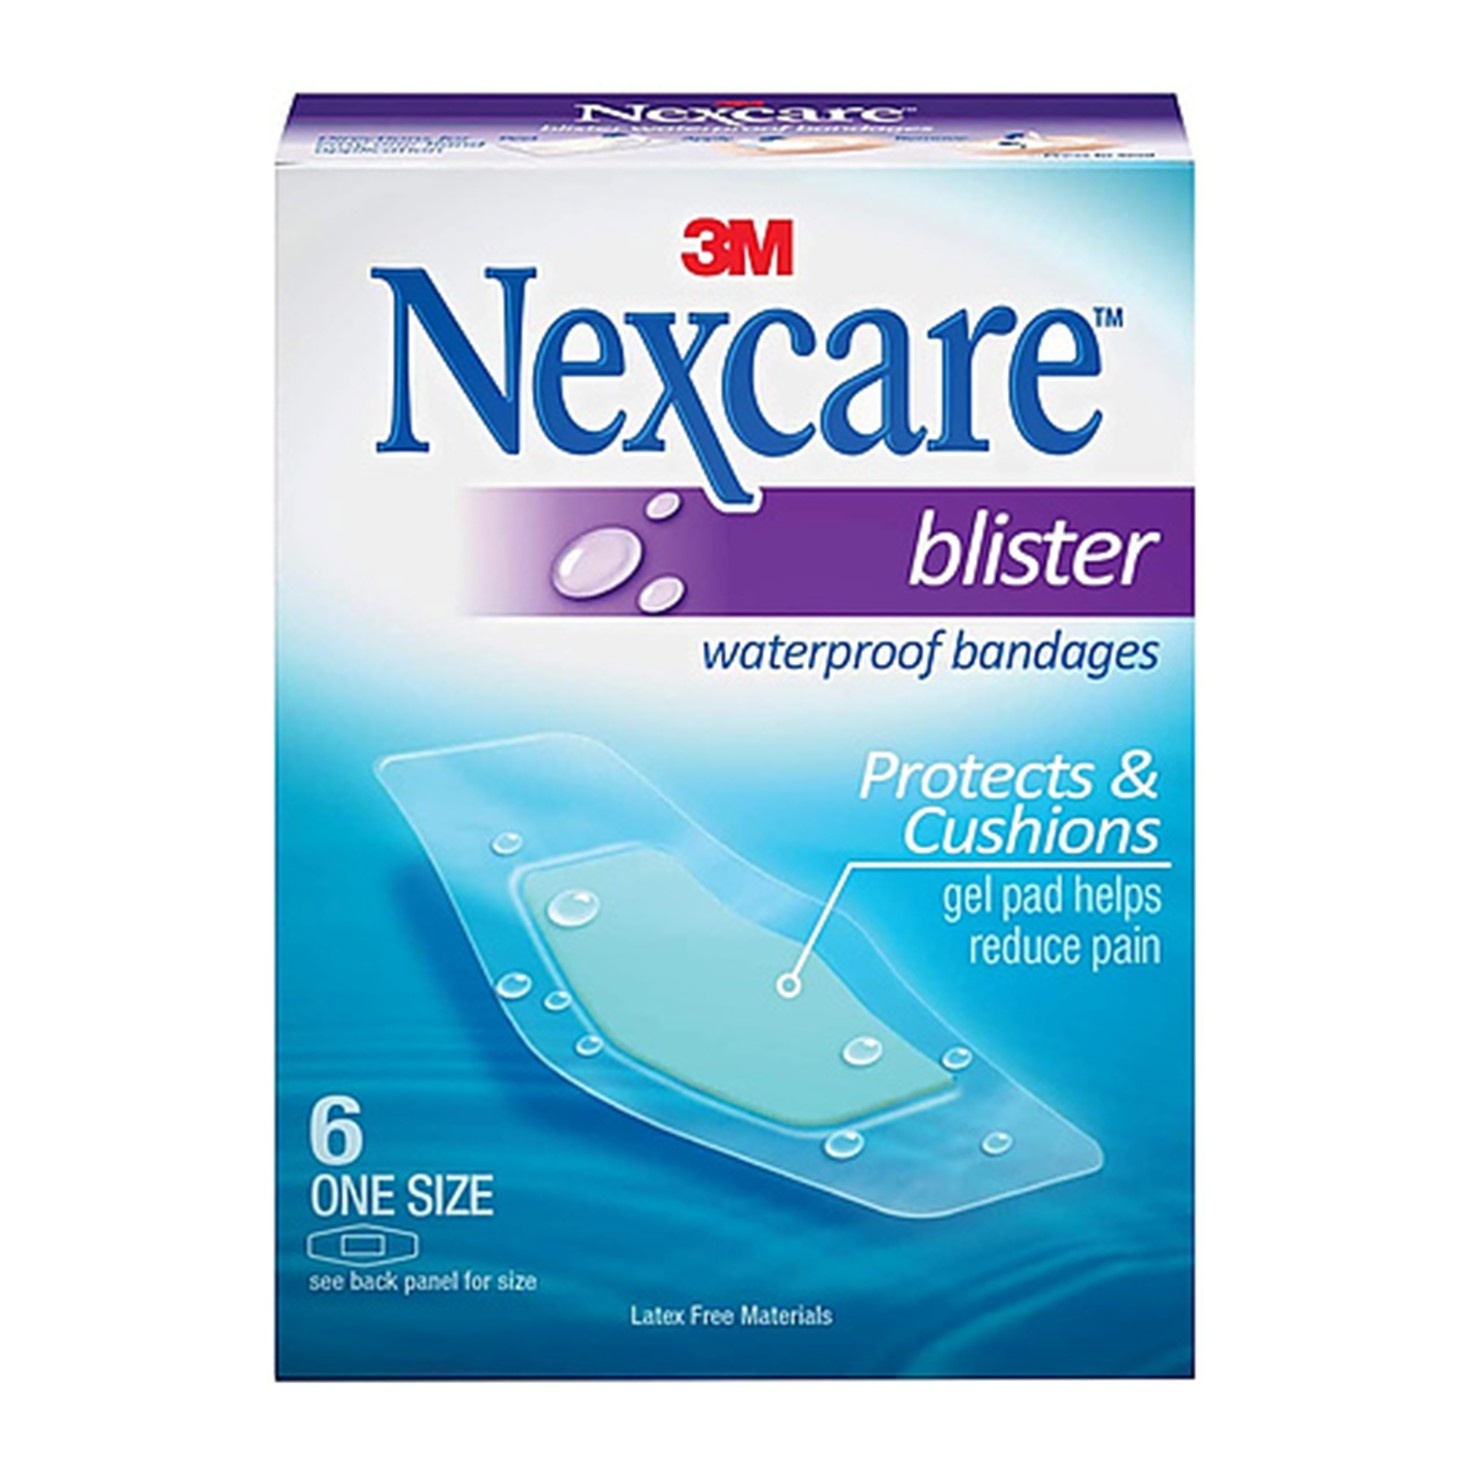 3M Nexcare™ Waterproof Blister Bandages